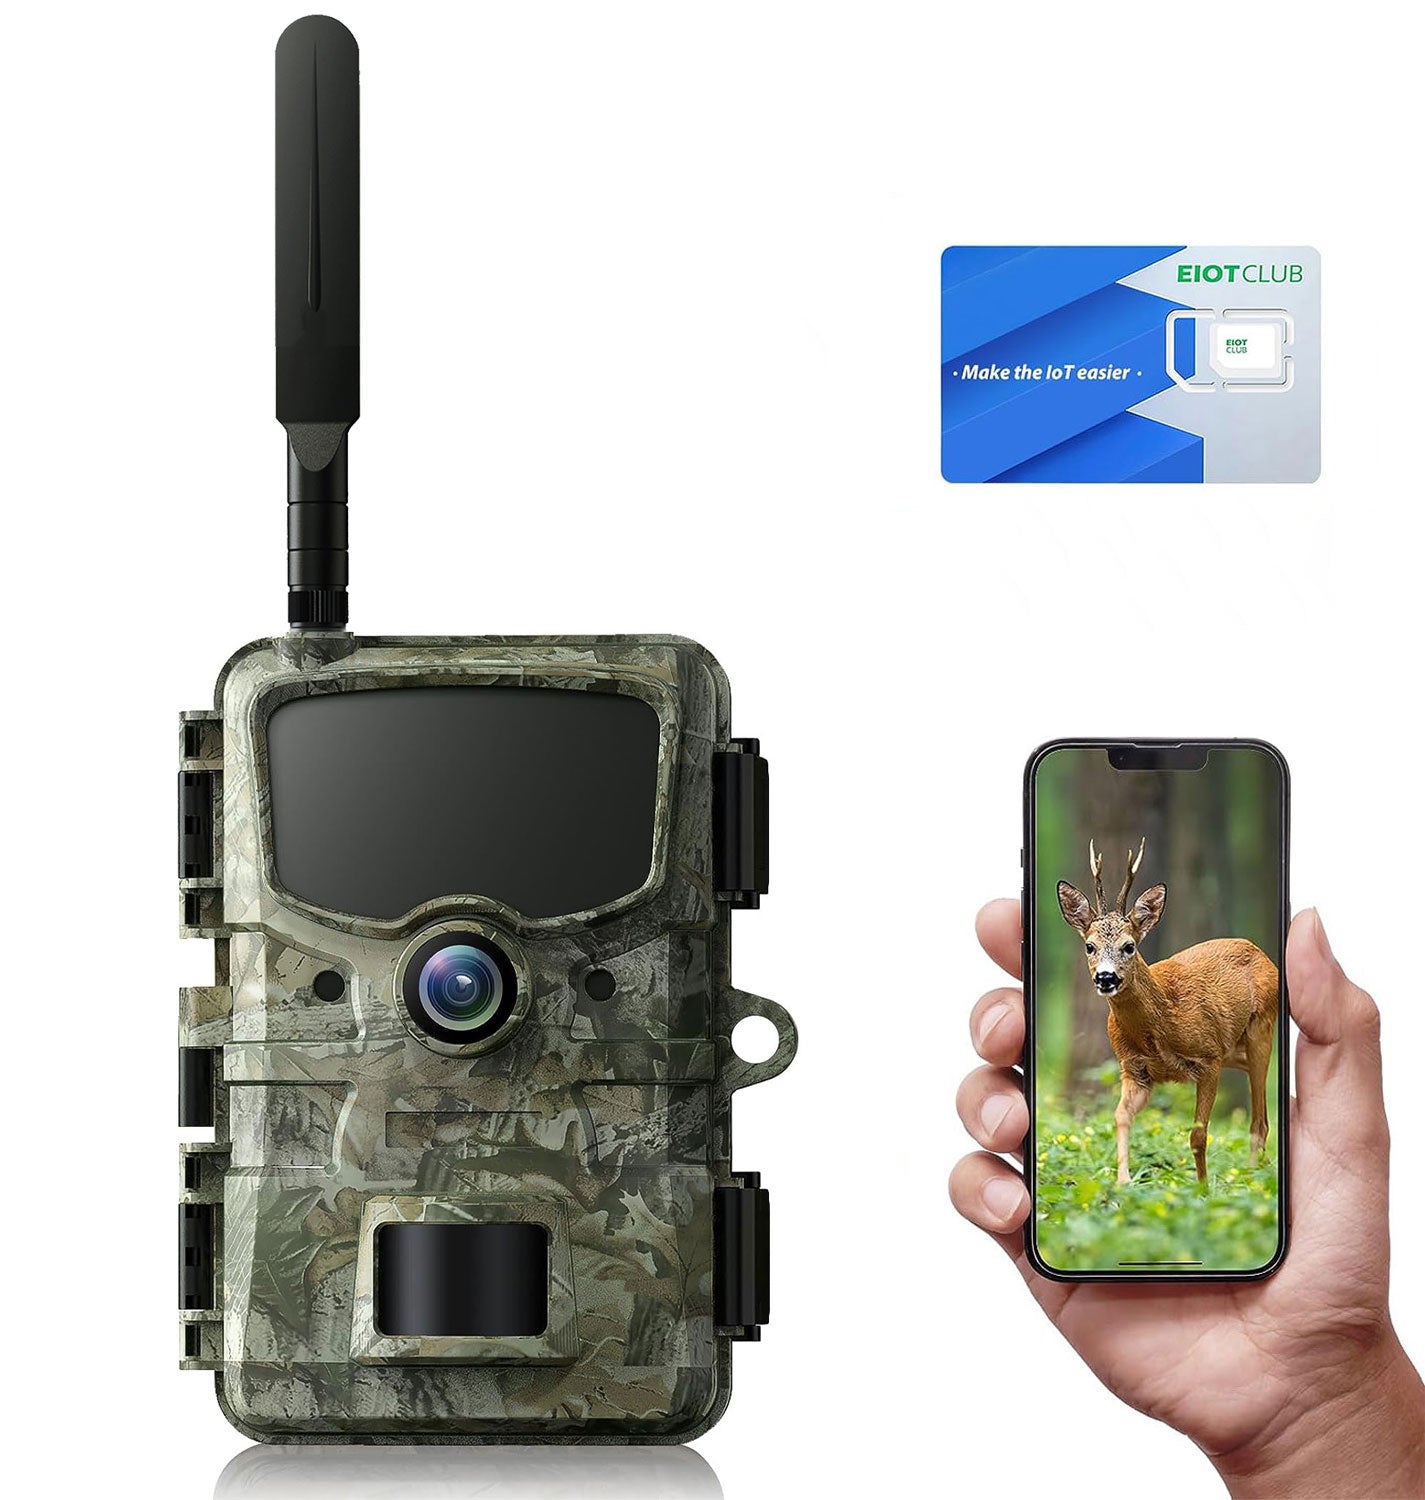 CAMPARK 4G LTE Cellular Trail Camera Sends Picture Video to Cell Phone - Game Camera 24MP 1080P Hunting Camera with Night Vision Motion Activated Waterproof IP66 2.4" Screen for Wildlife Monitoring